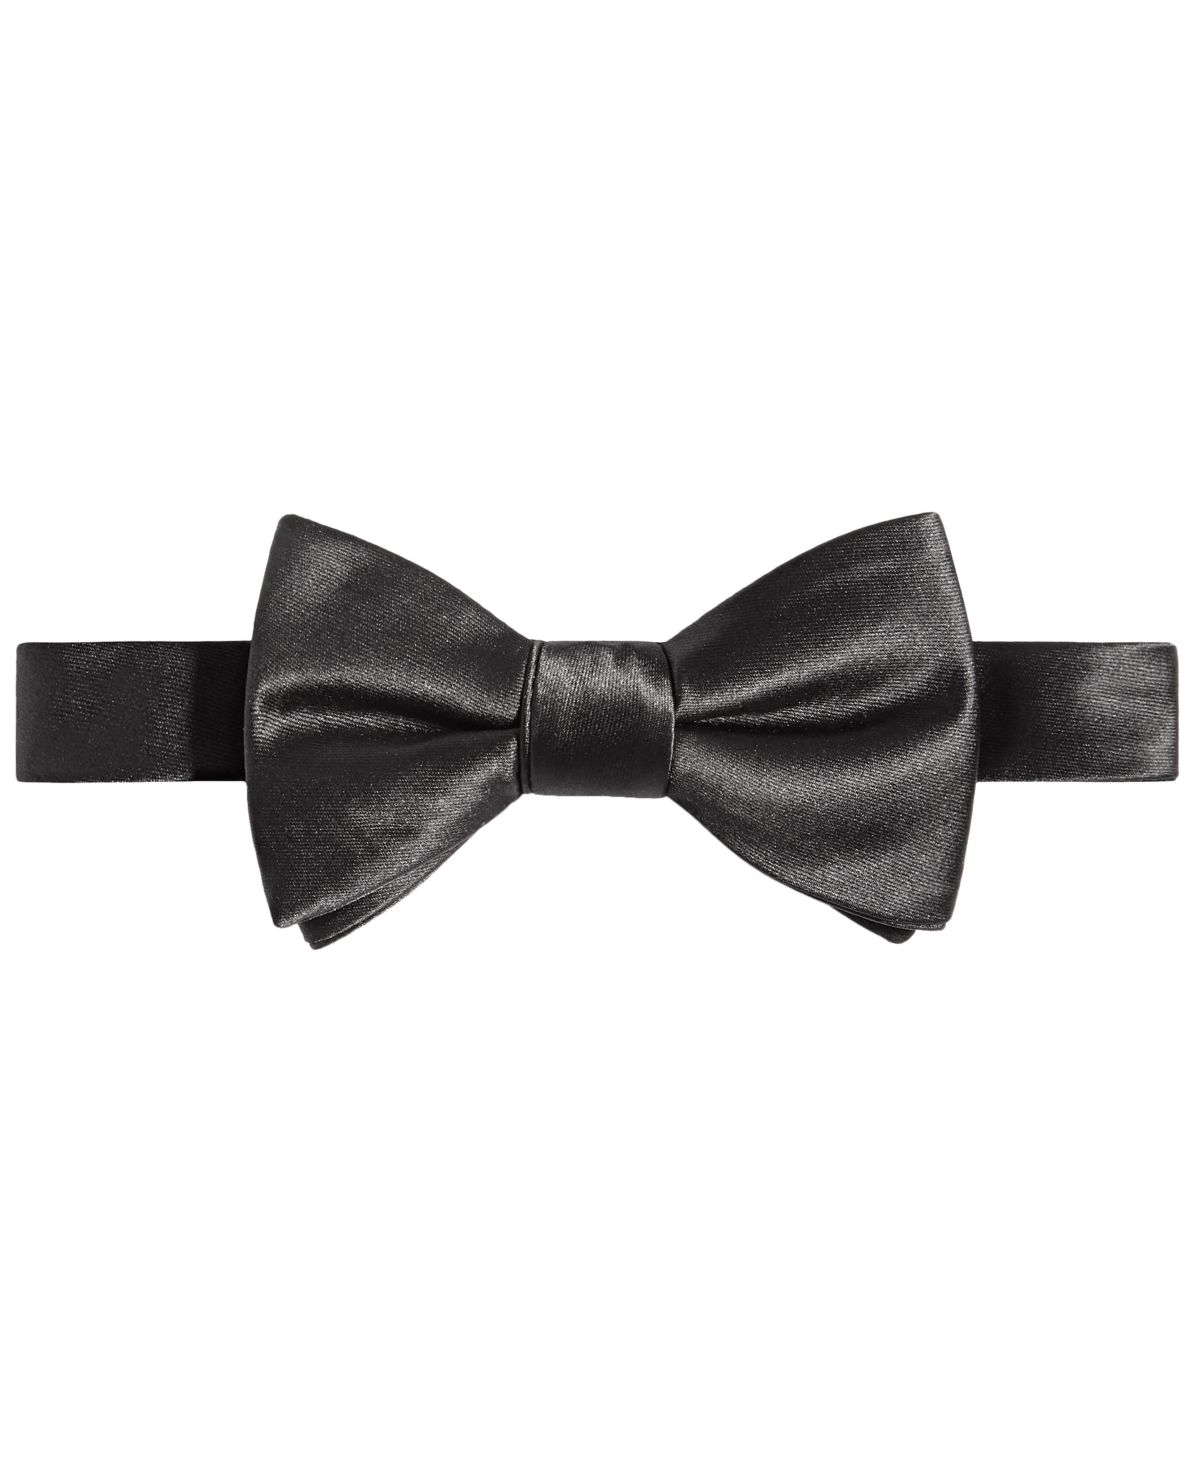 Shop Tayion Collection Men's Black & Gold Solid Bow Tie